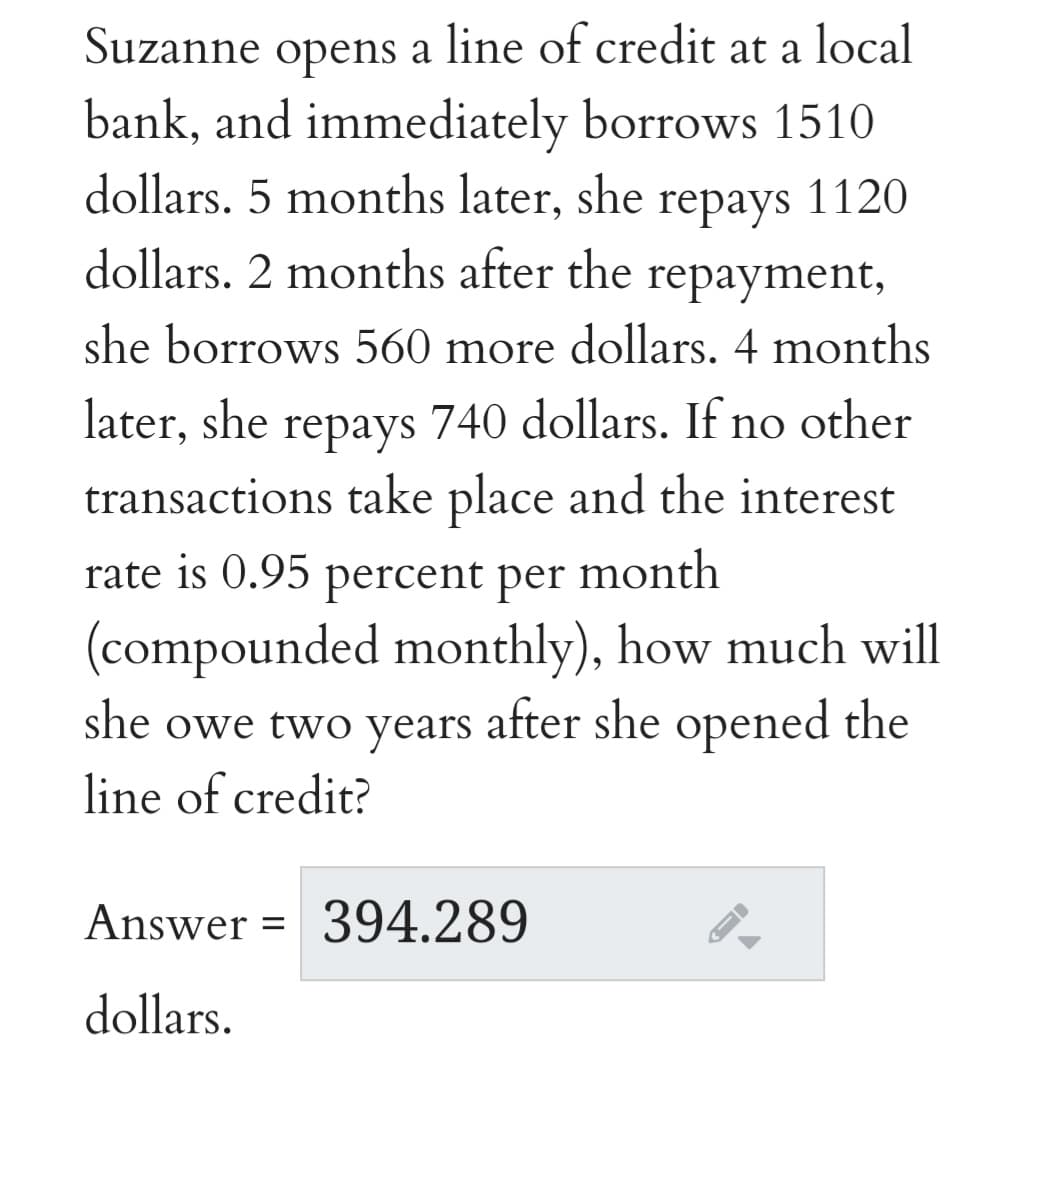 Suzanne opens a line of credit at a local
bank, and immediately borrows 1510
dollars. 5 months later, she repays 1120
dollars. 2 months after the
repayment,
she borrows 560 more dollars. 4 months
later, she repays 740 dollars. If no other
transactions take place and the interest
rate is 0.95
percent per
month
(compounded monthly), how much will
she owe two years after she opened the
line of credit?
Answer =
394.289
dollars.
